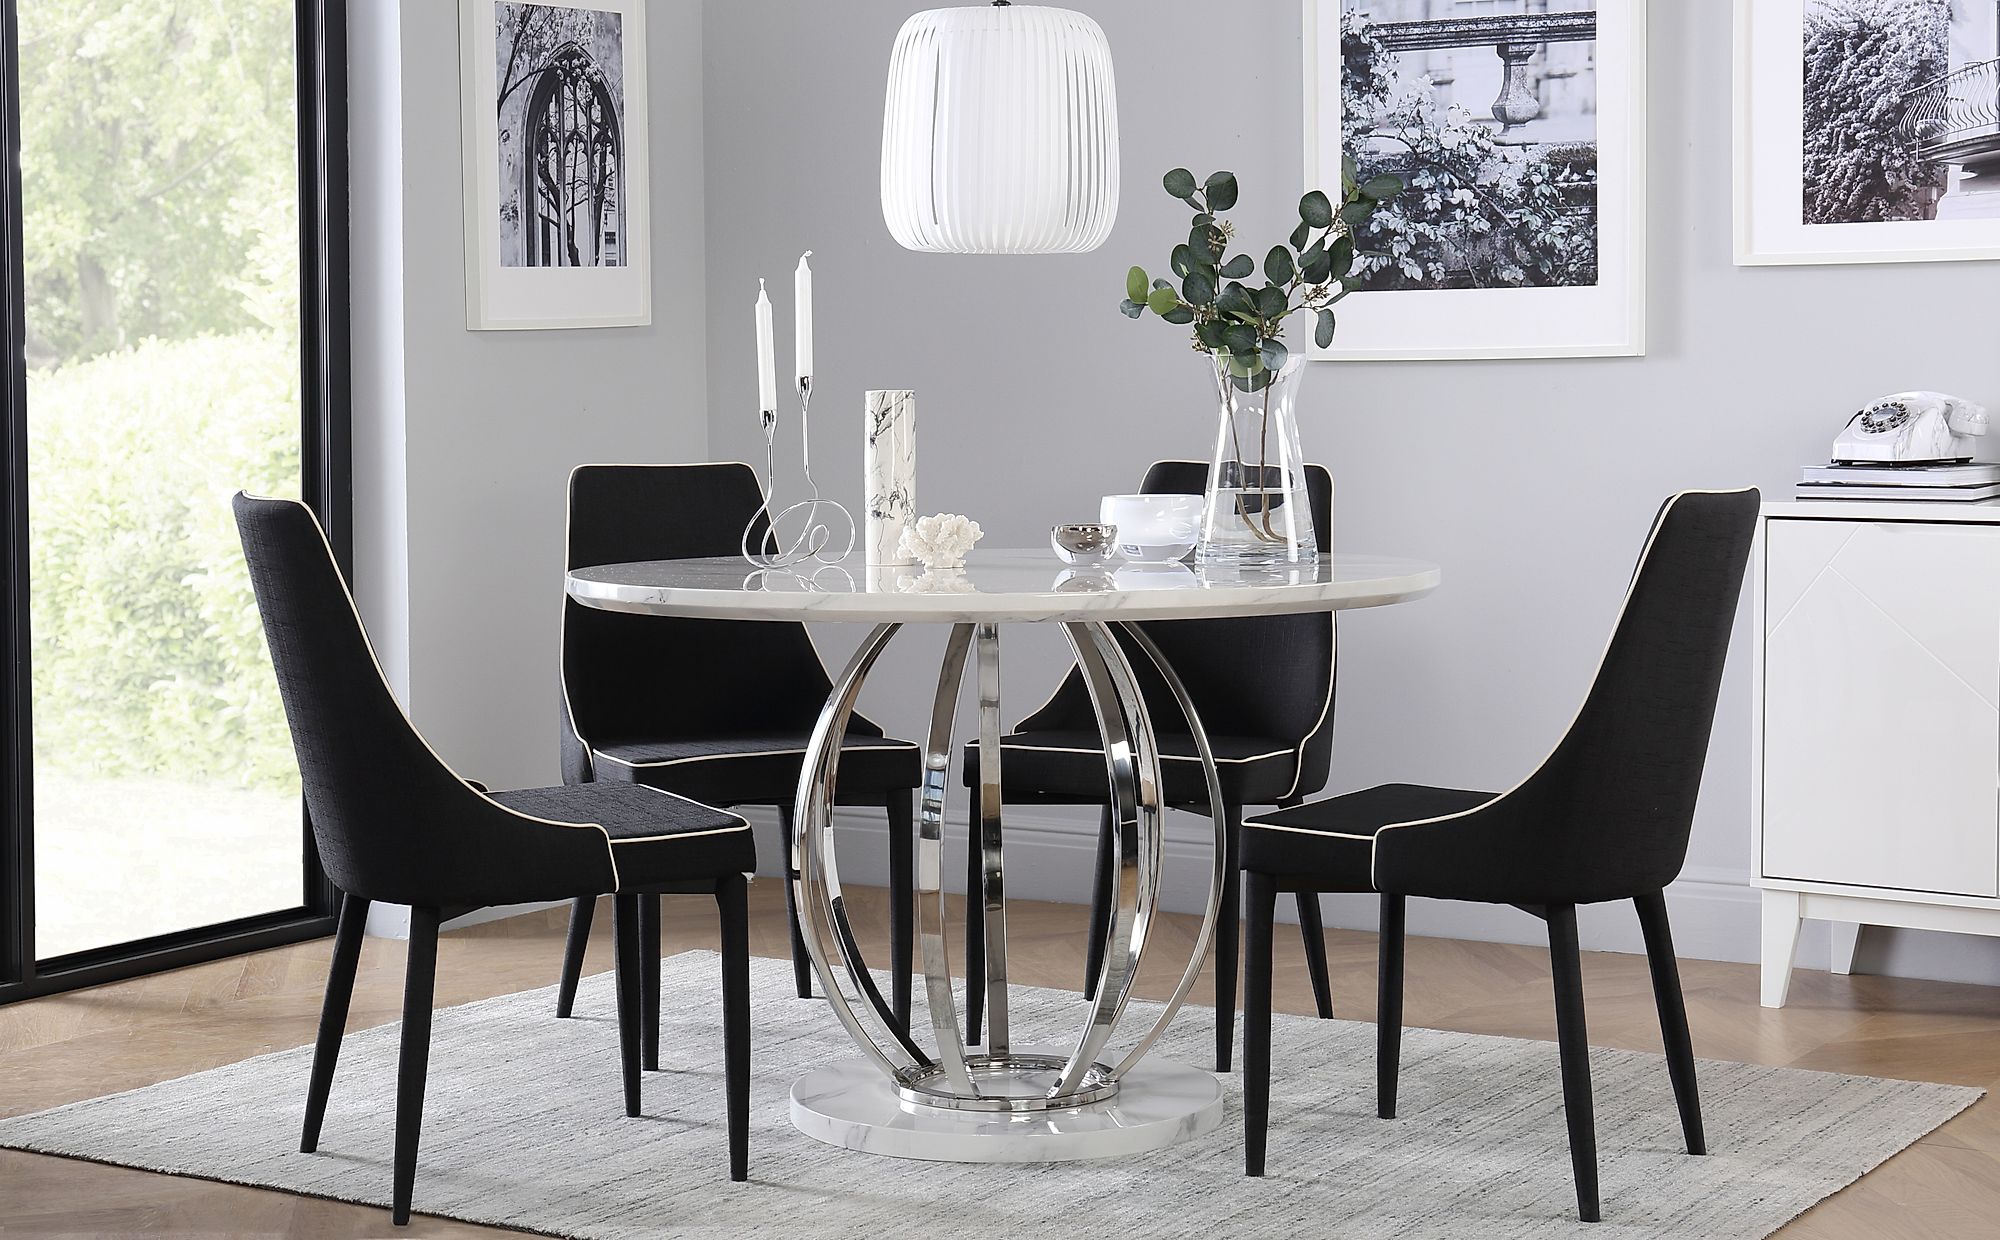 Savoy Round White Marble and Chrome Dining Table with 4 ...